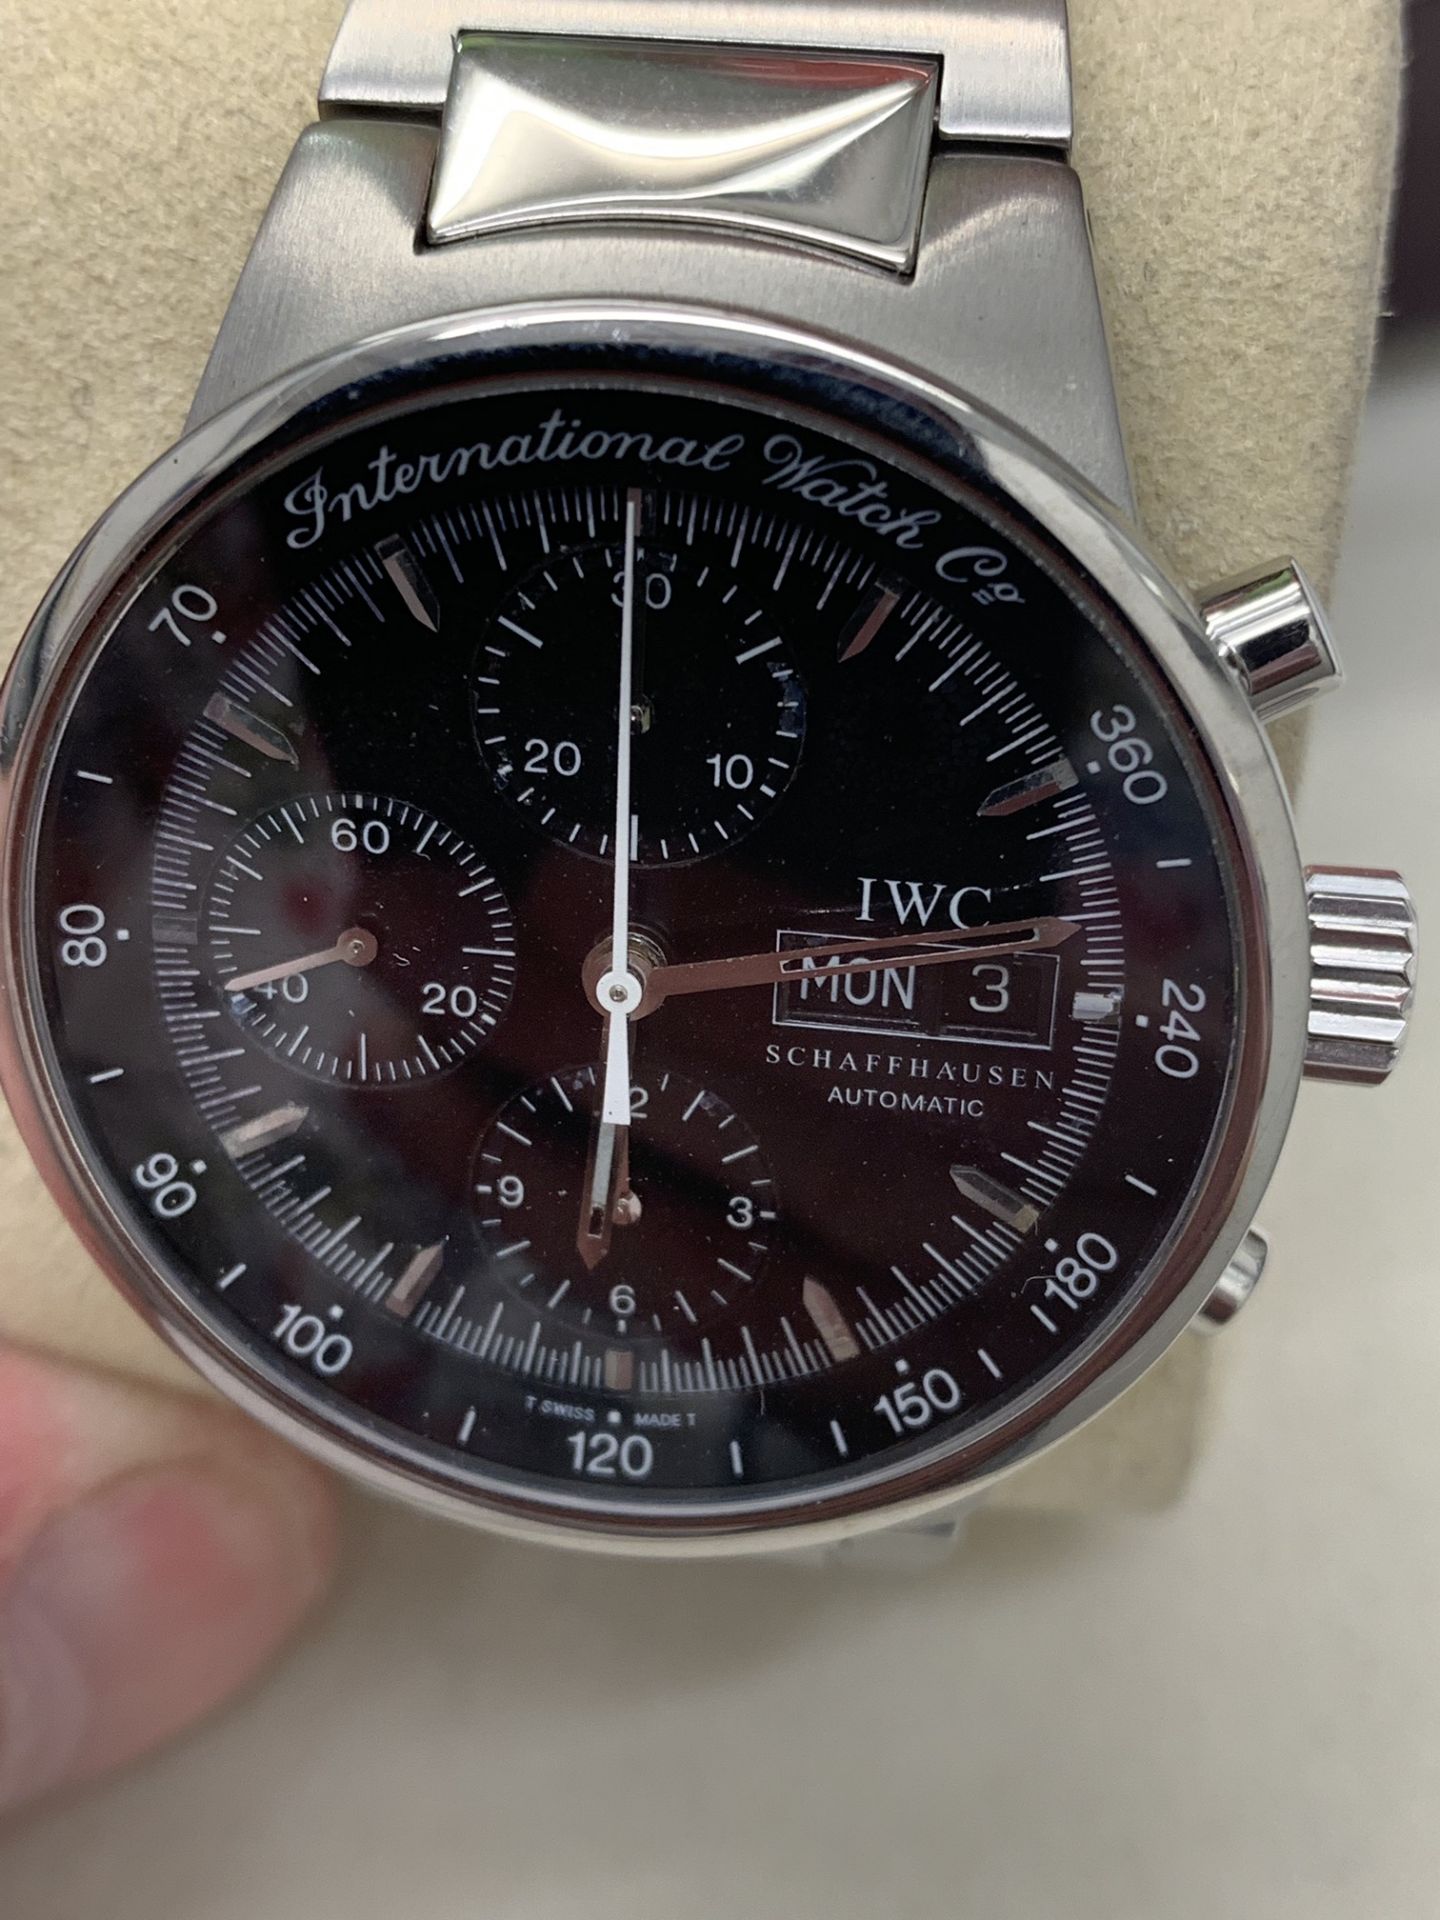 IWC CHRONOGRAPH S/STEEL WATCH 39.5mm AUTOMATIC